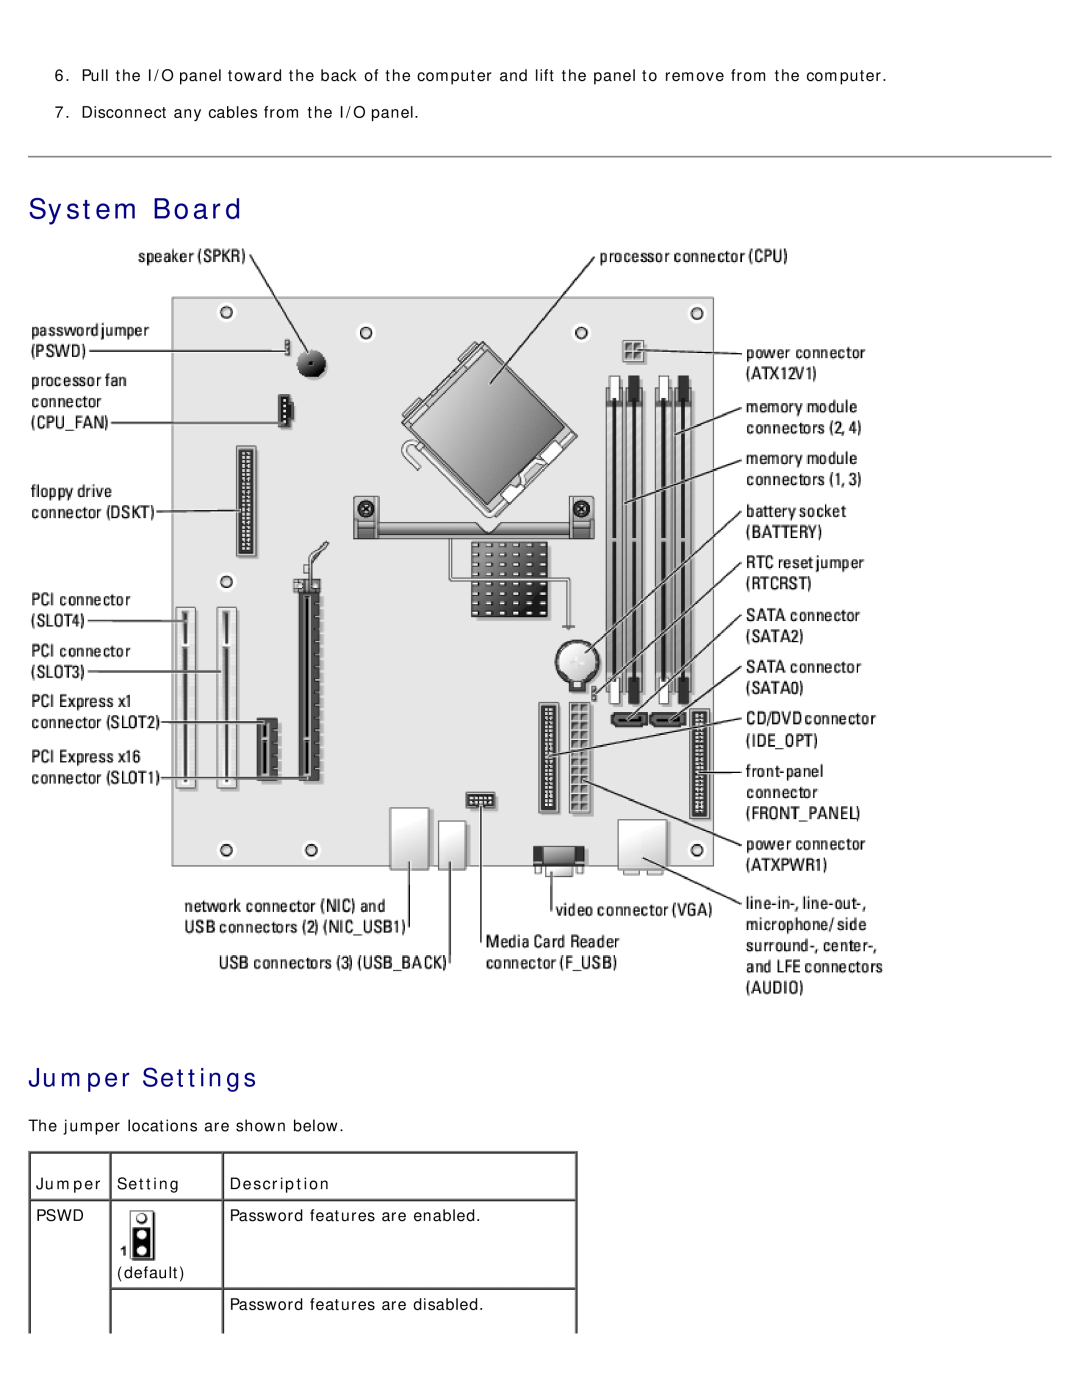 Dell DCSM manual System Board, Jumper Settings, Description, Pswd, Password features are enabled 